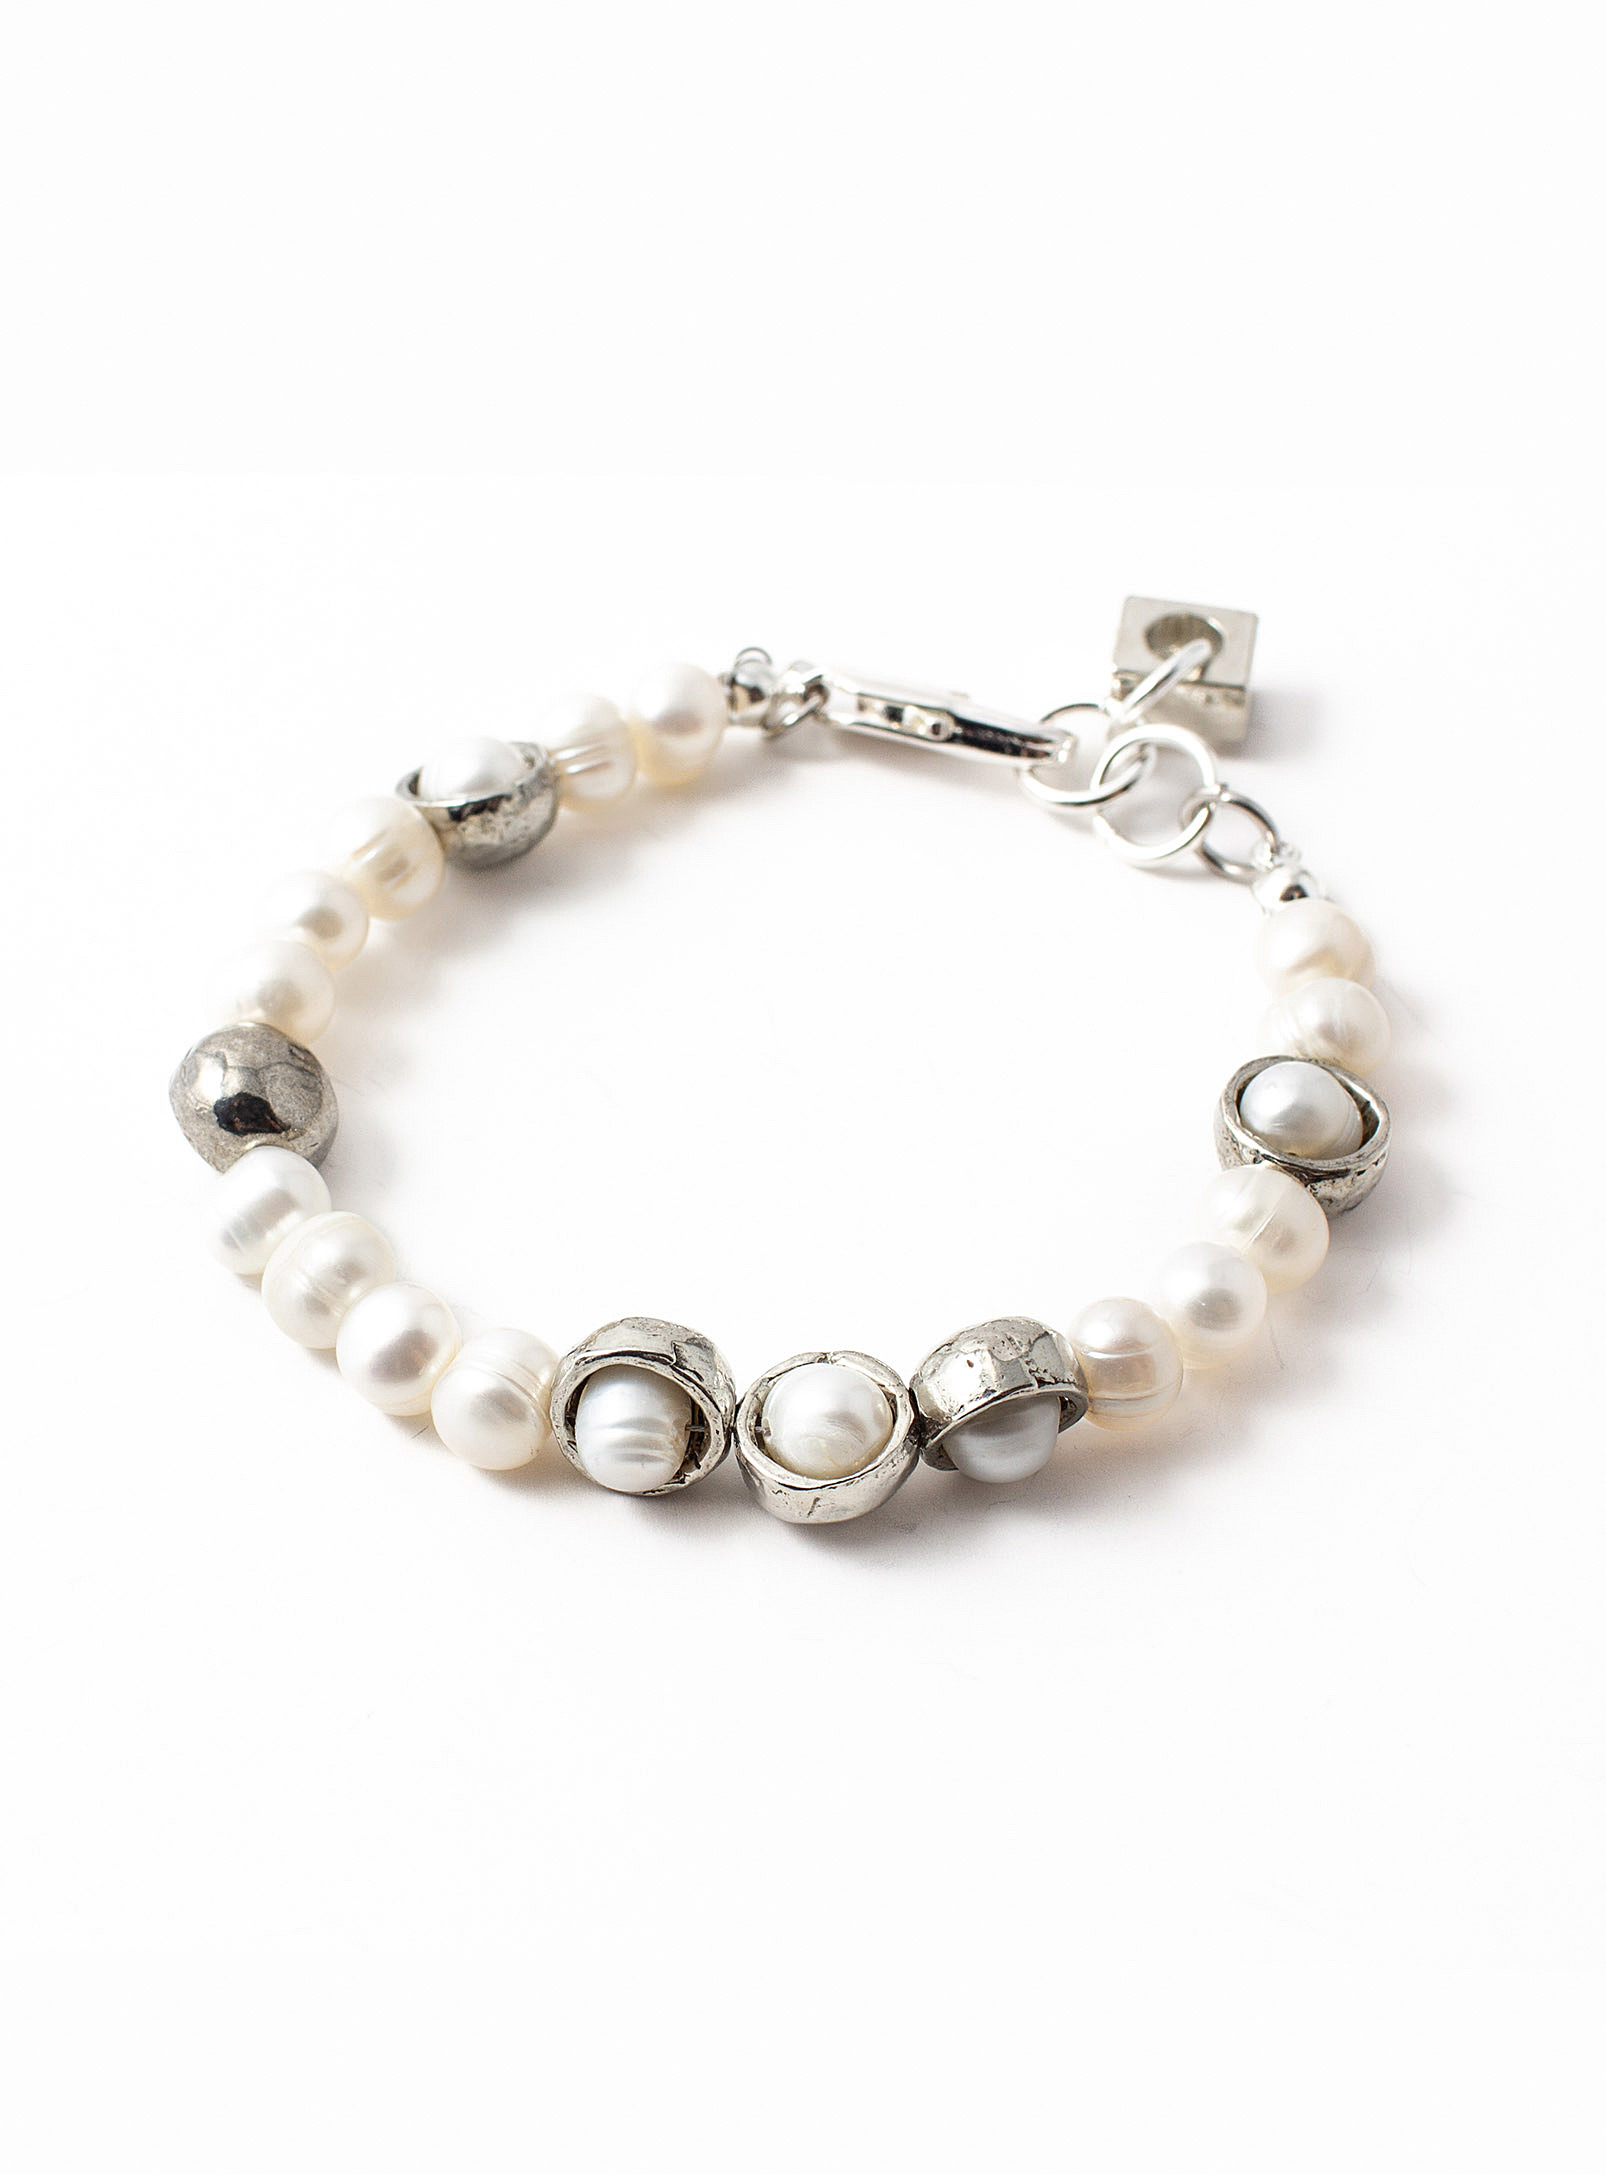 Anne-Marie Chagnon - Solveil sterling silver and pearl bracelet